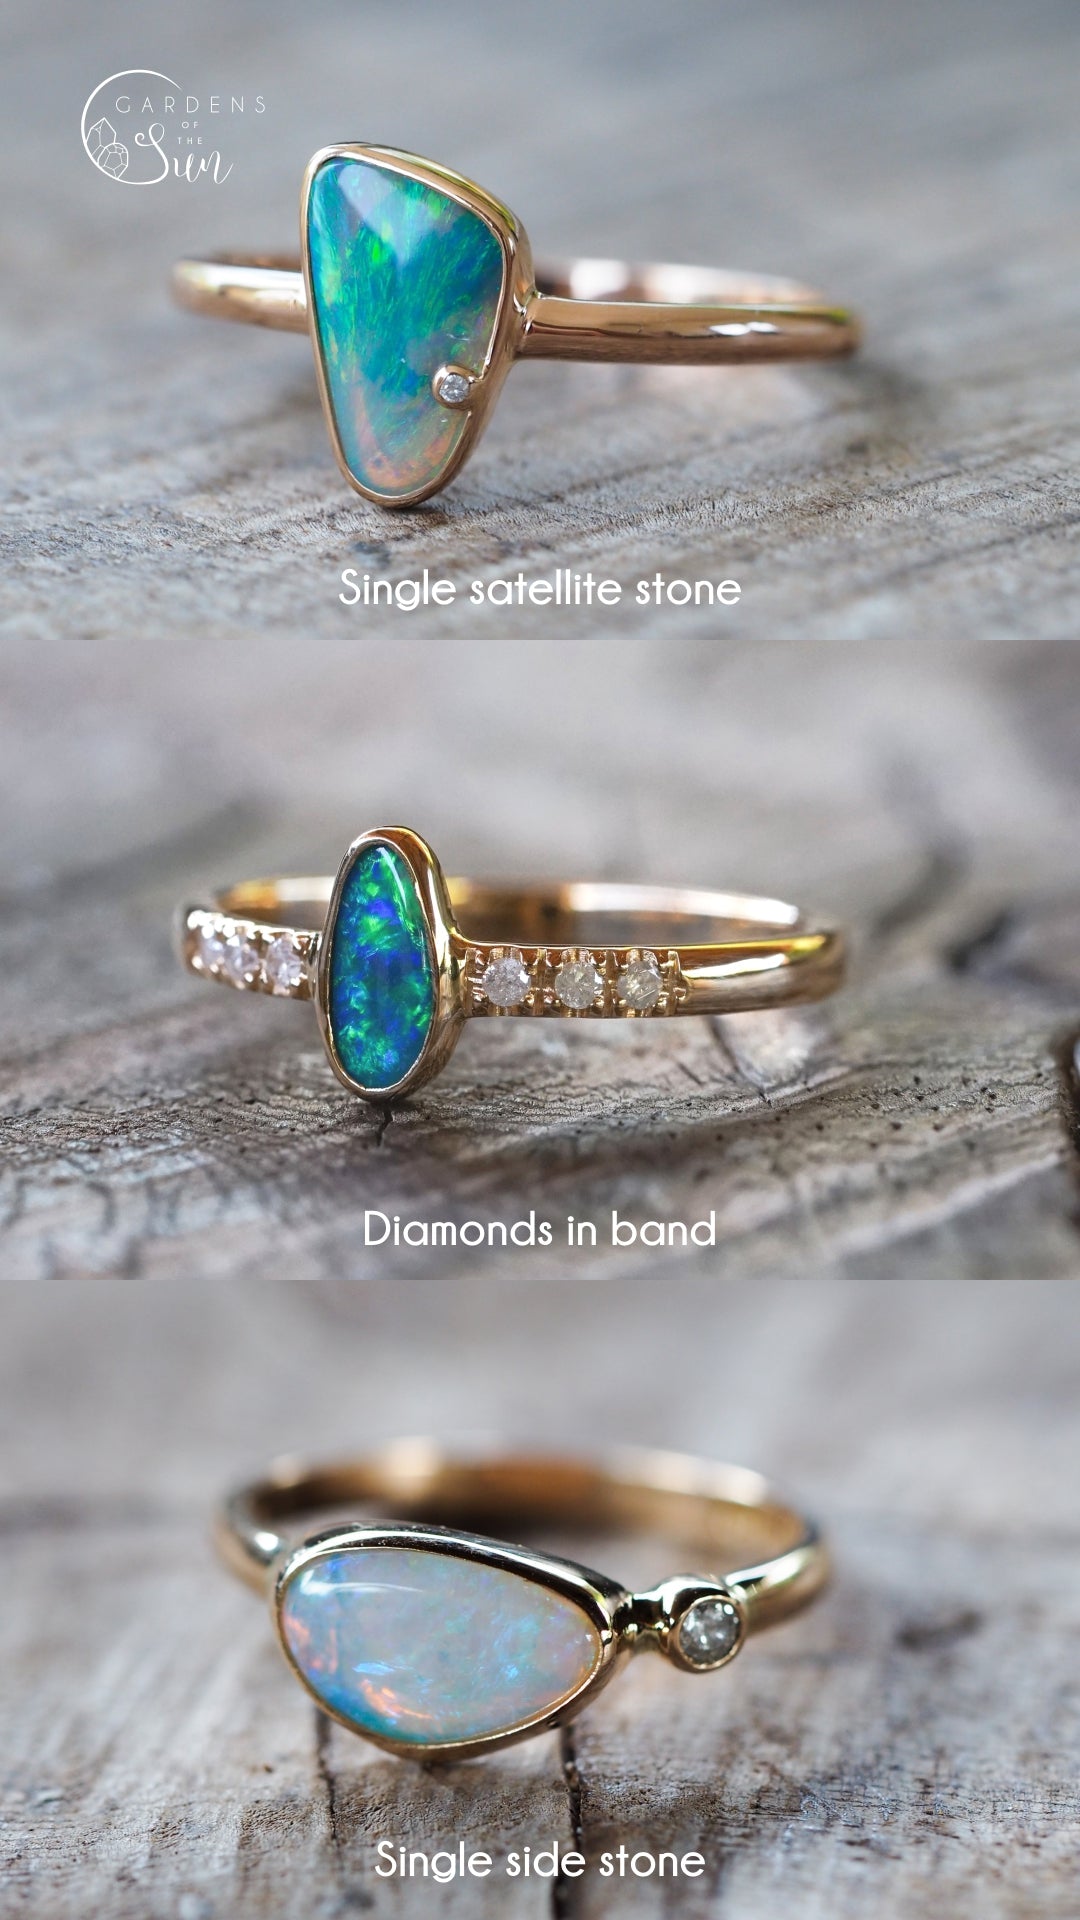 About Our Custom Wedding Rings & Bands | Made in Australia